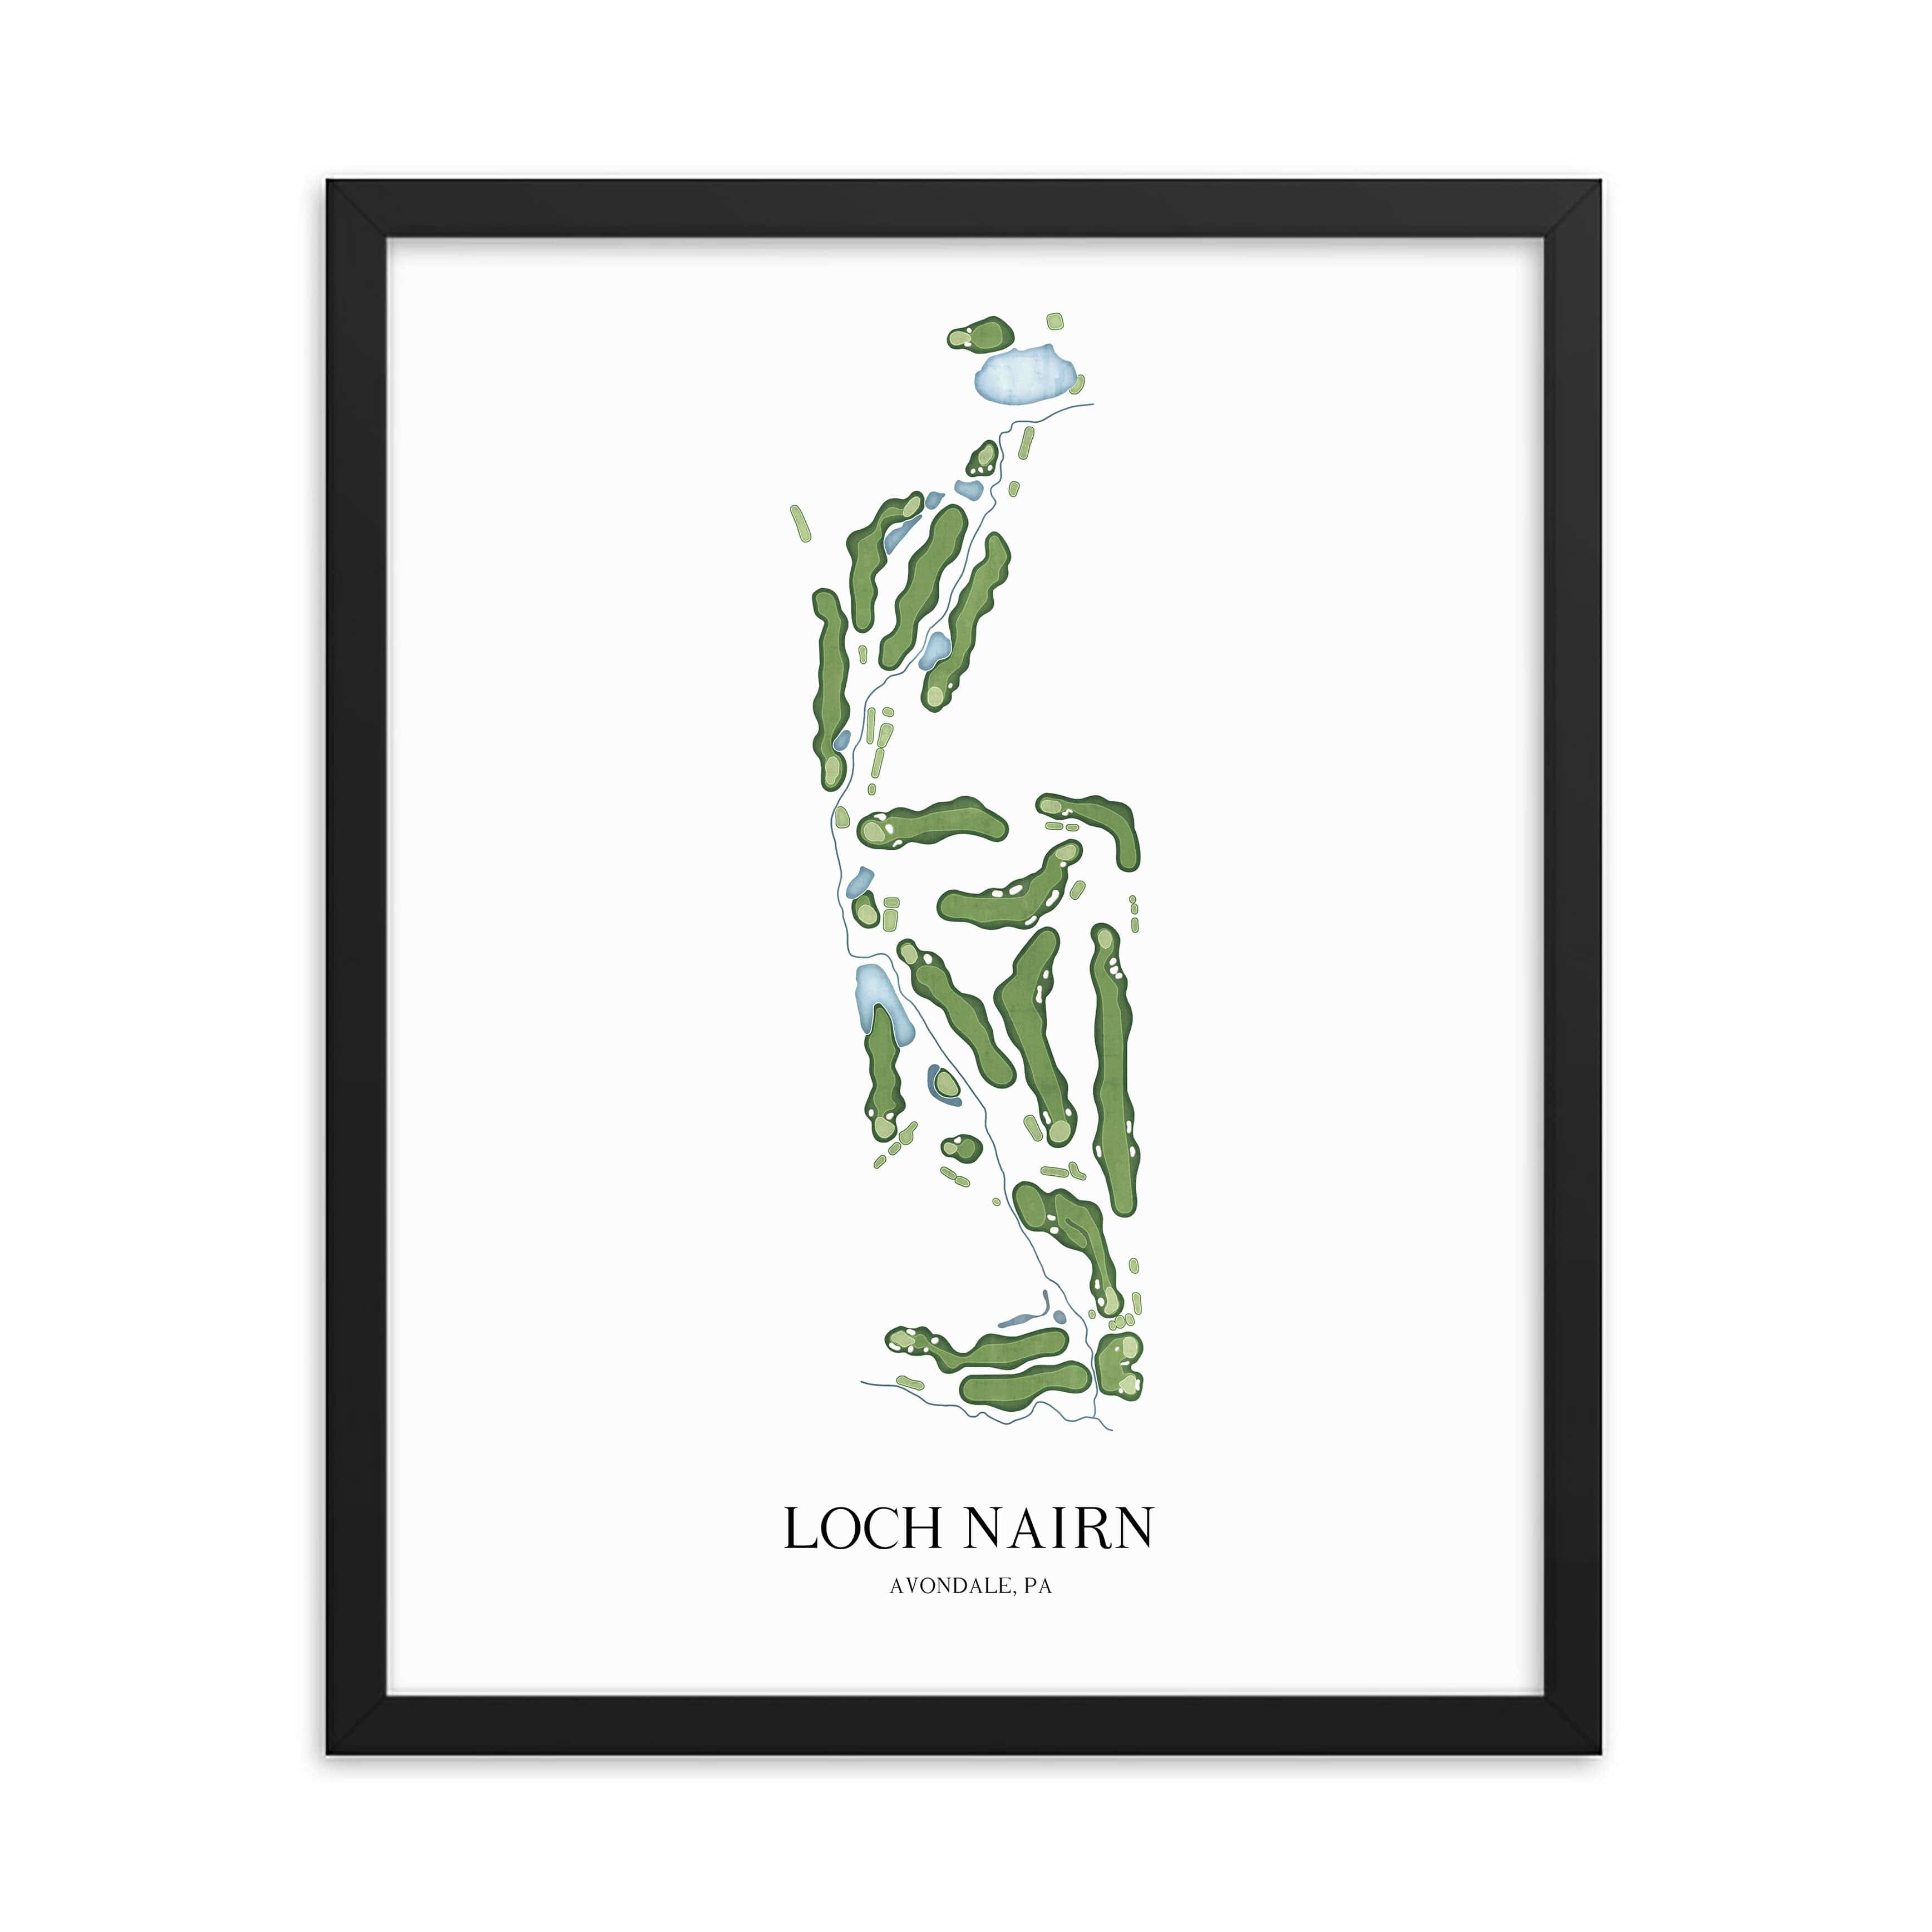 The 19th Hole Golf Shop - Golf Course Prints -  Loch Nairn Golf Course Map